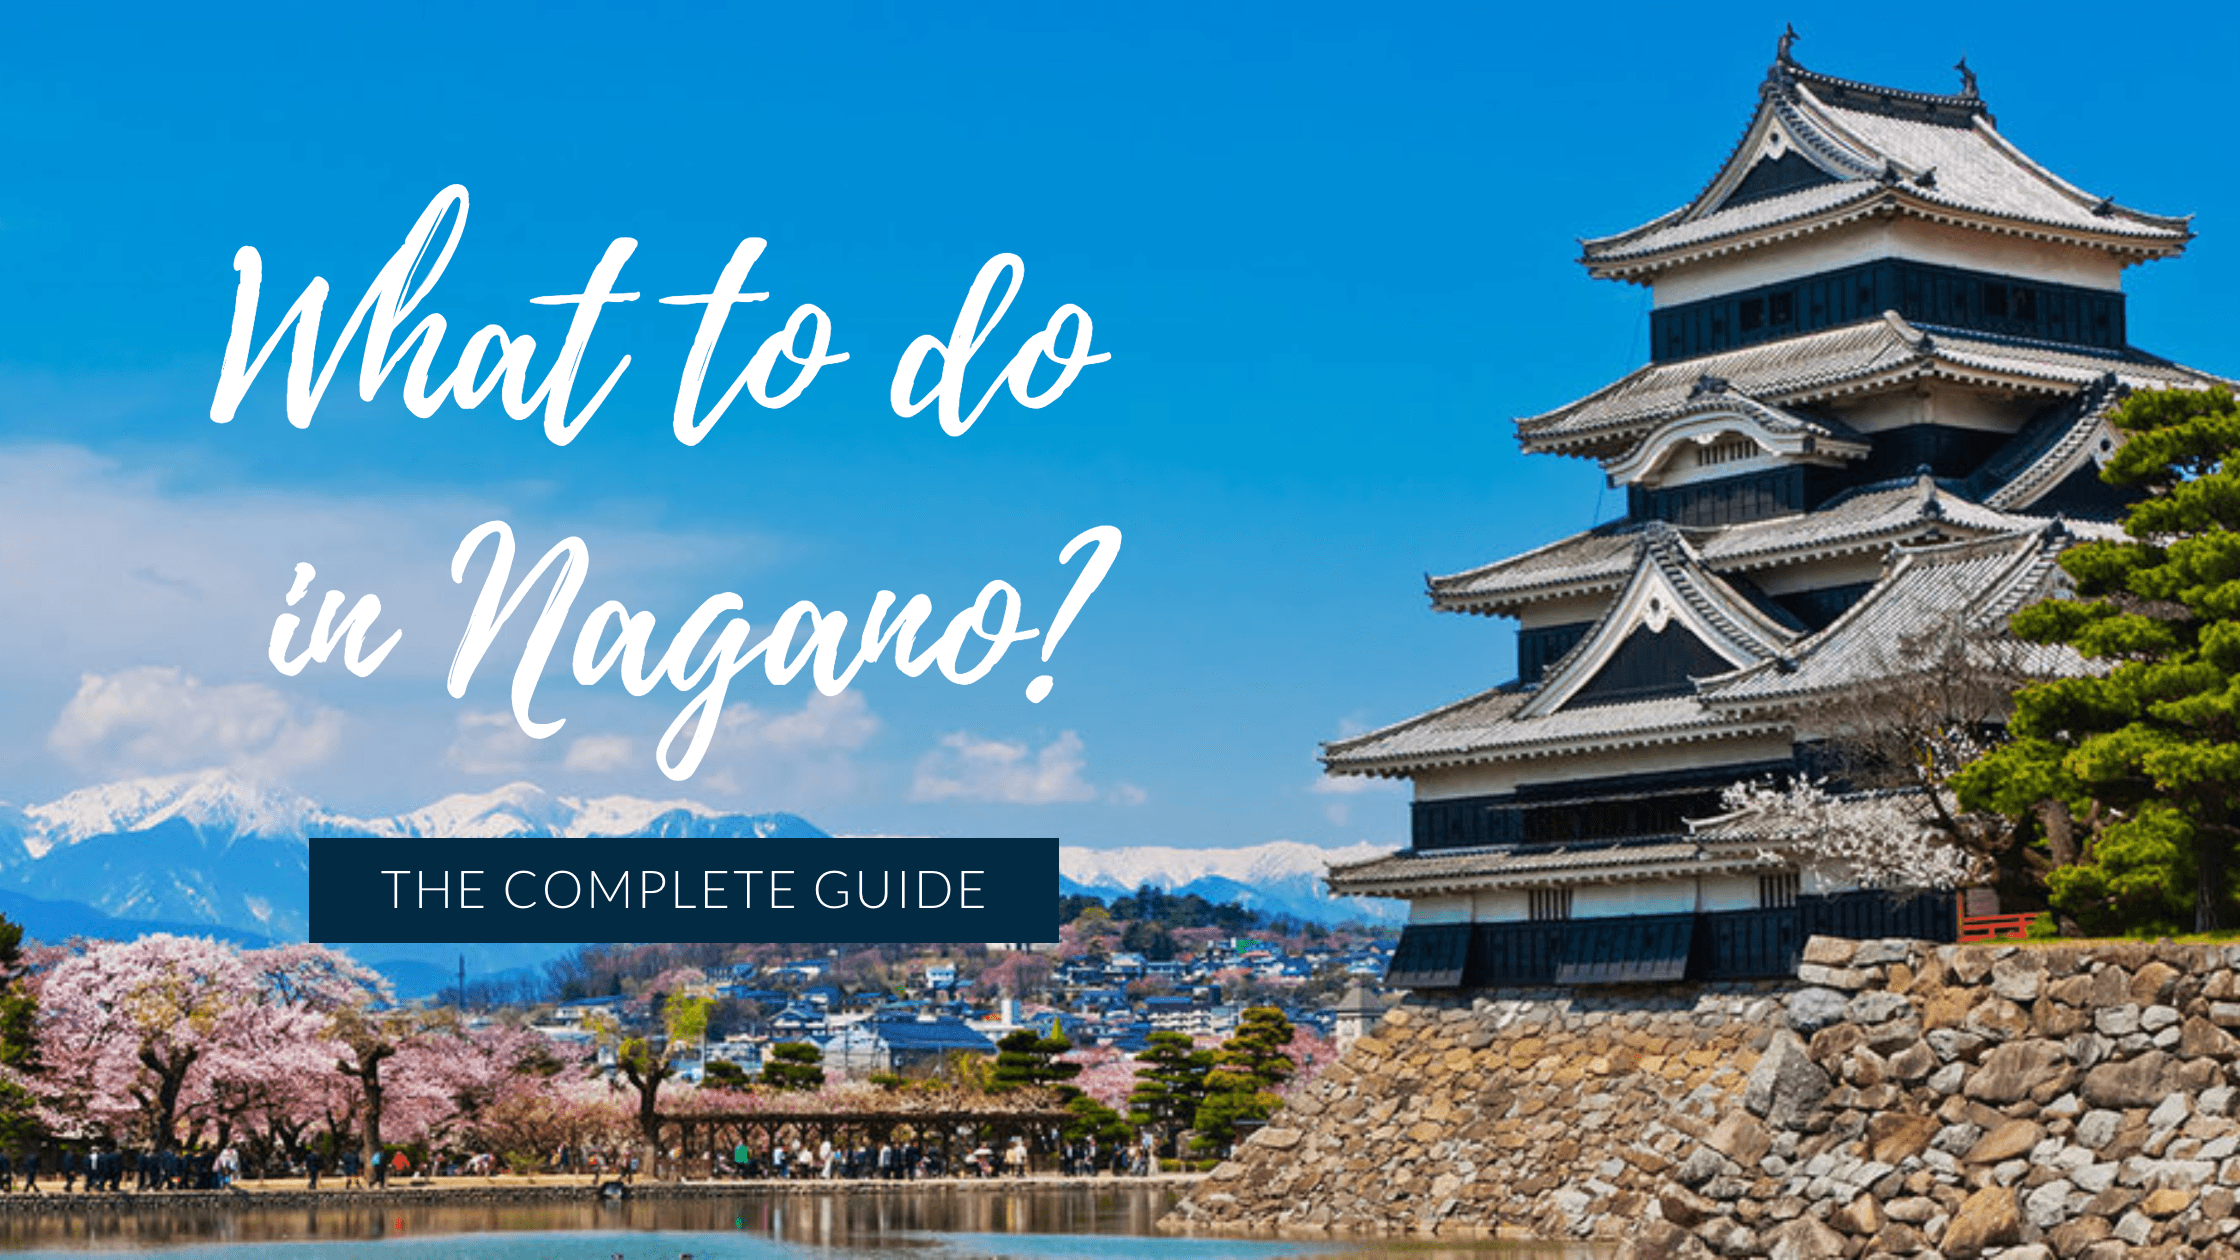 japan-landscape-what-to-do-in-nagano-blog-banner-template-thumbnail-img